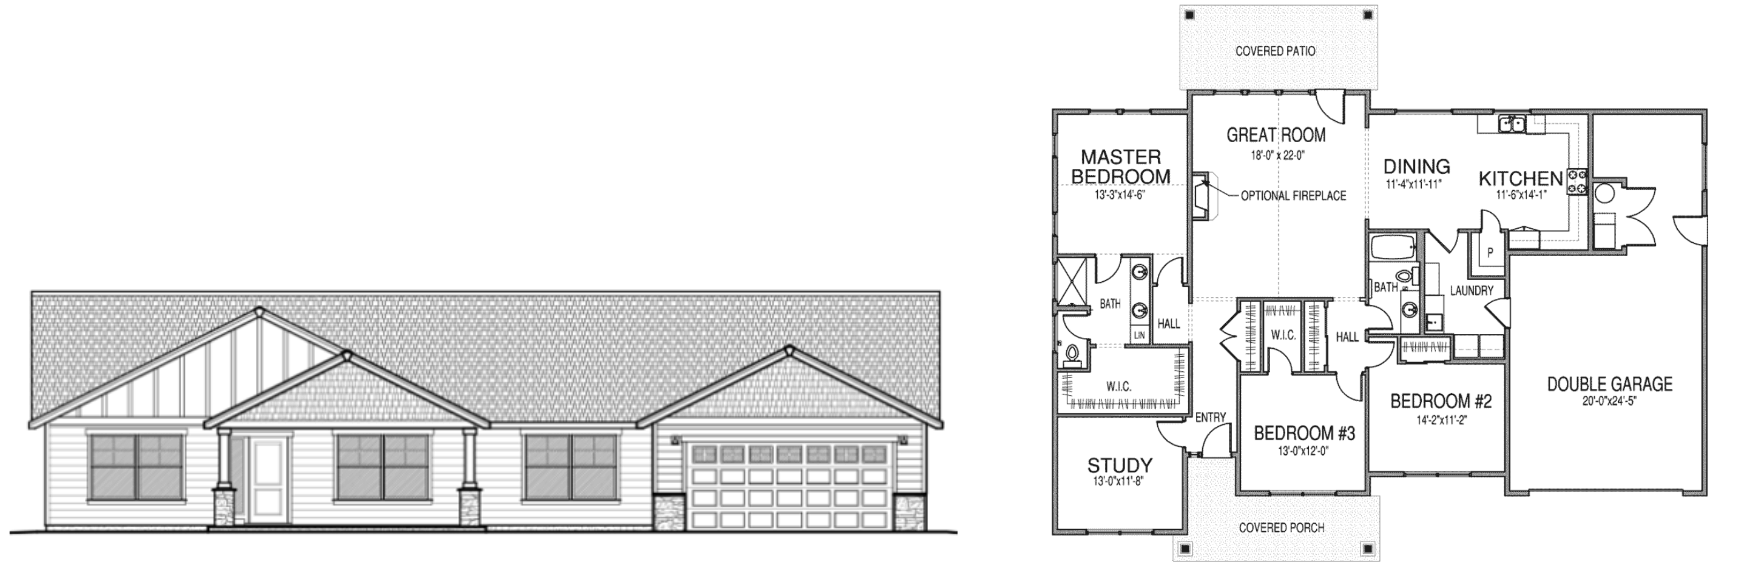 Hamilton single story home floor plan with a master bedroom with a walk in closet and bathroom, 2 additional bedrooms with one having a walk in closet, another bathroom, a great room, dining room, kitchen, laundry room, study, double garage, and a covered porch and patio